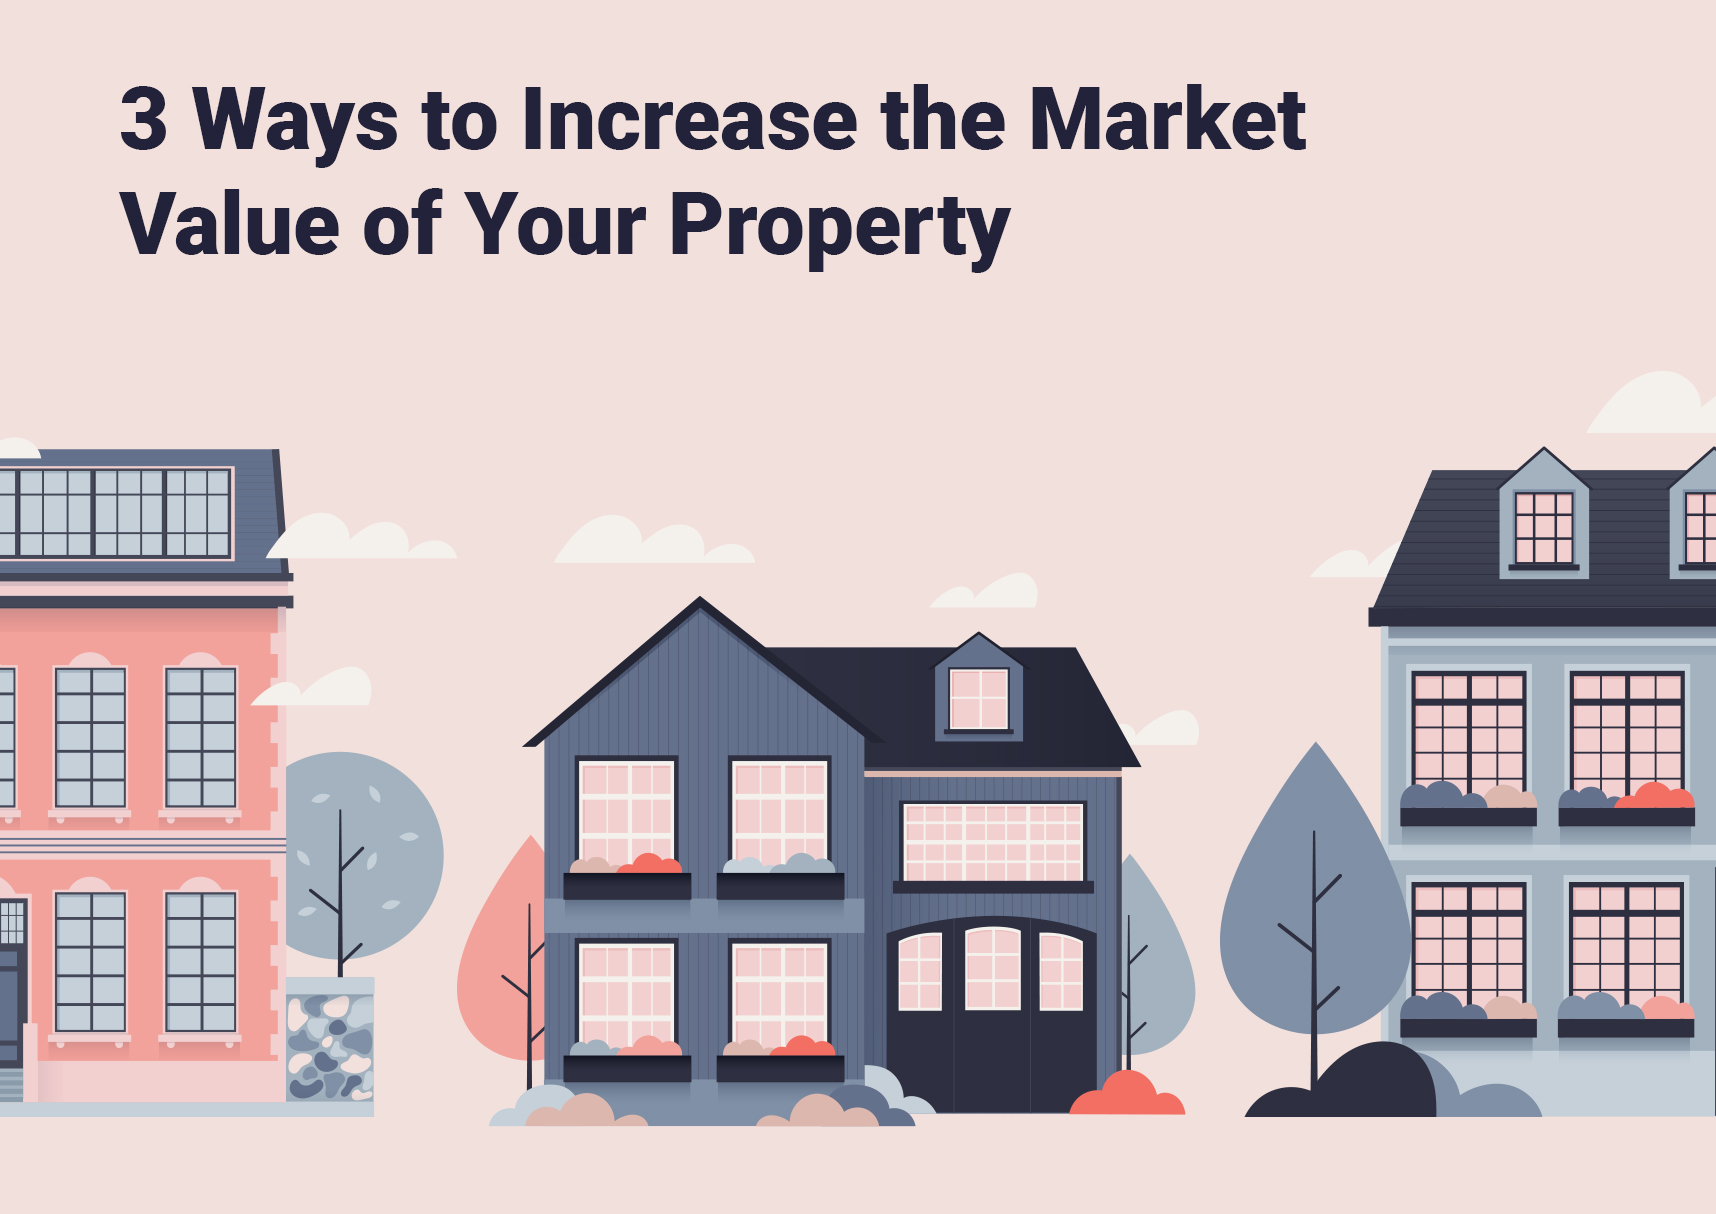 3 Ways to Increase the Market Value of Your Property